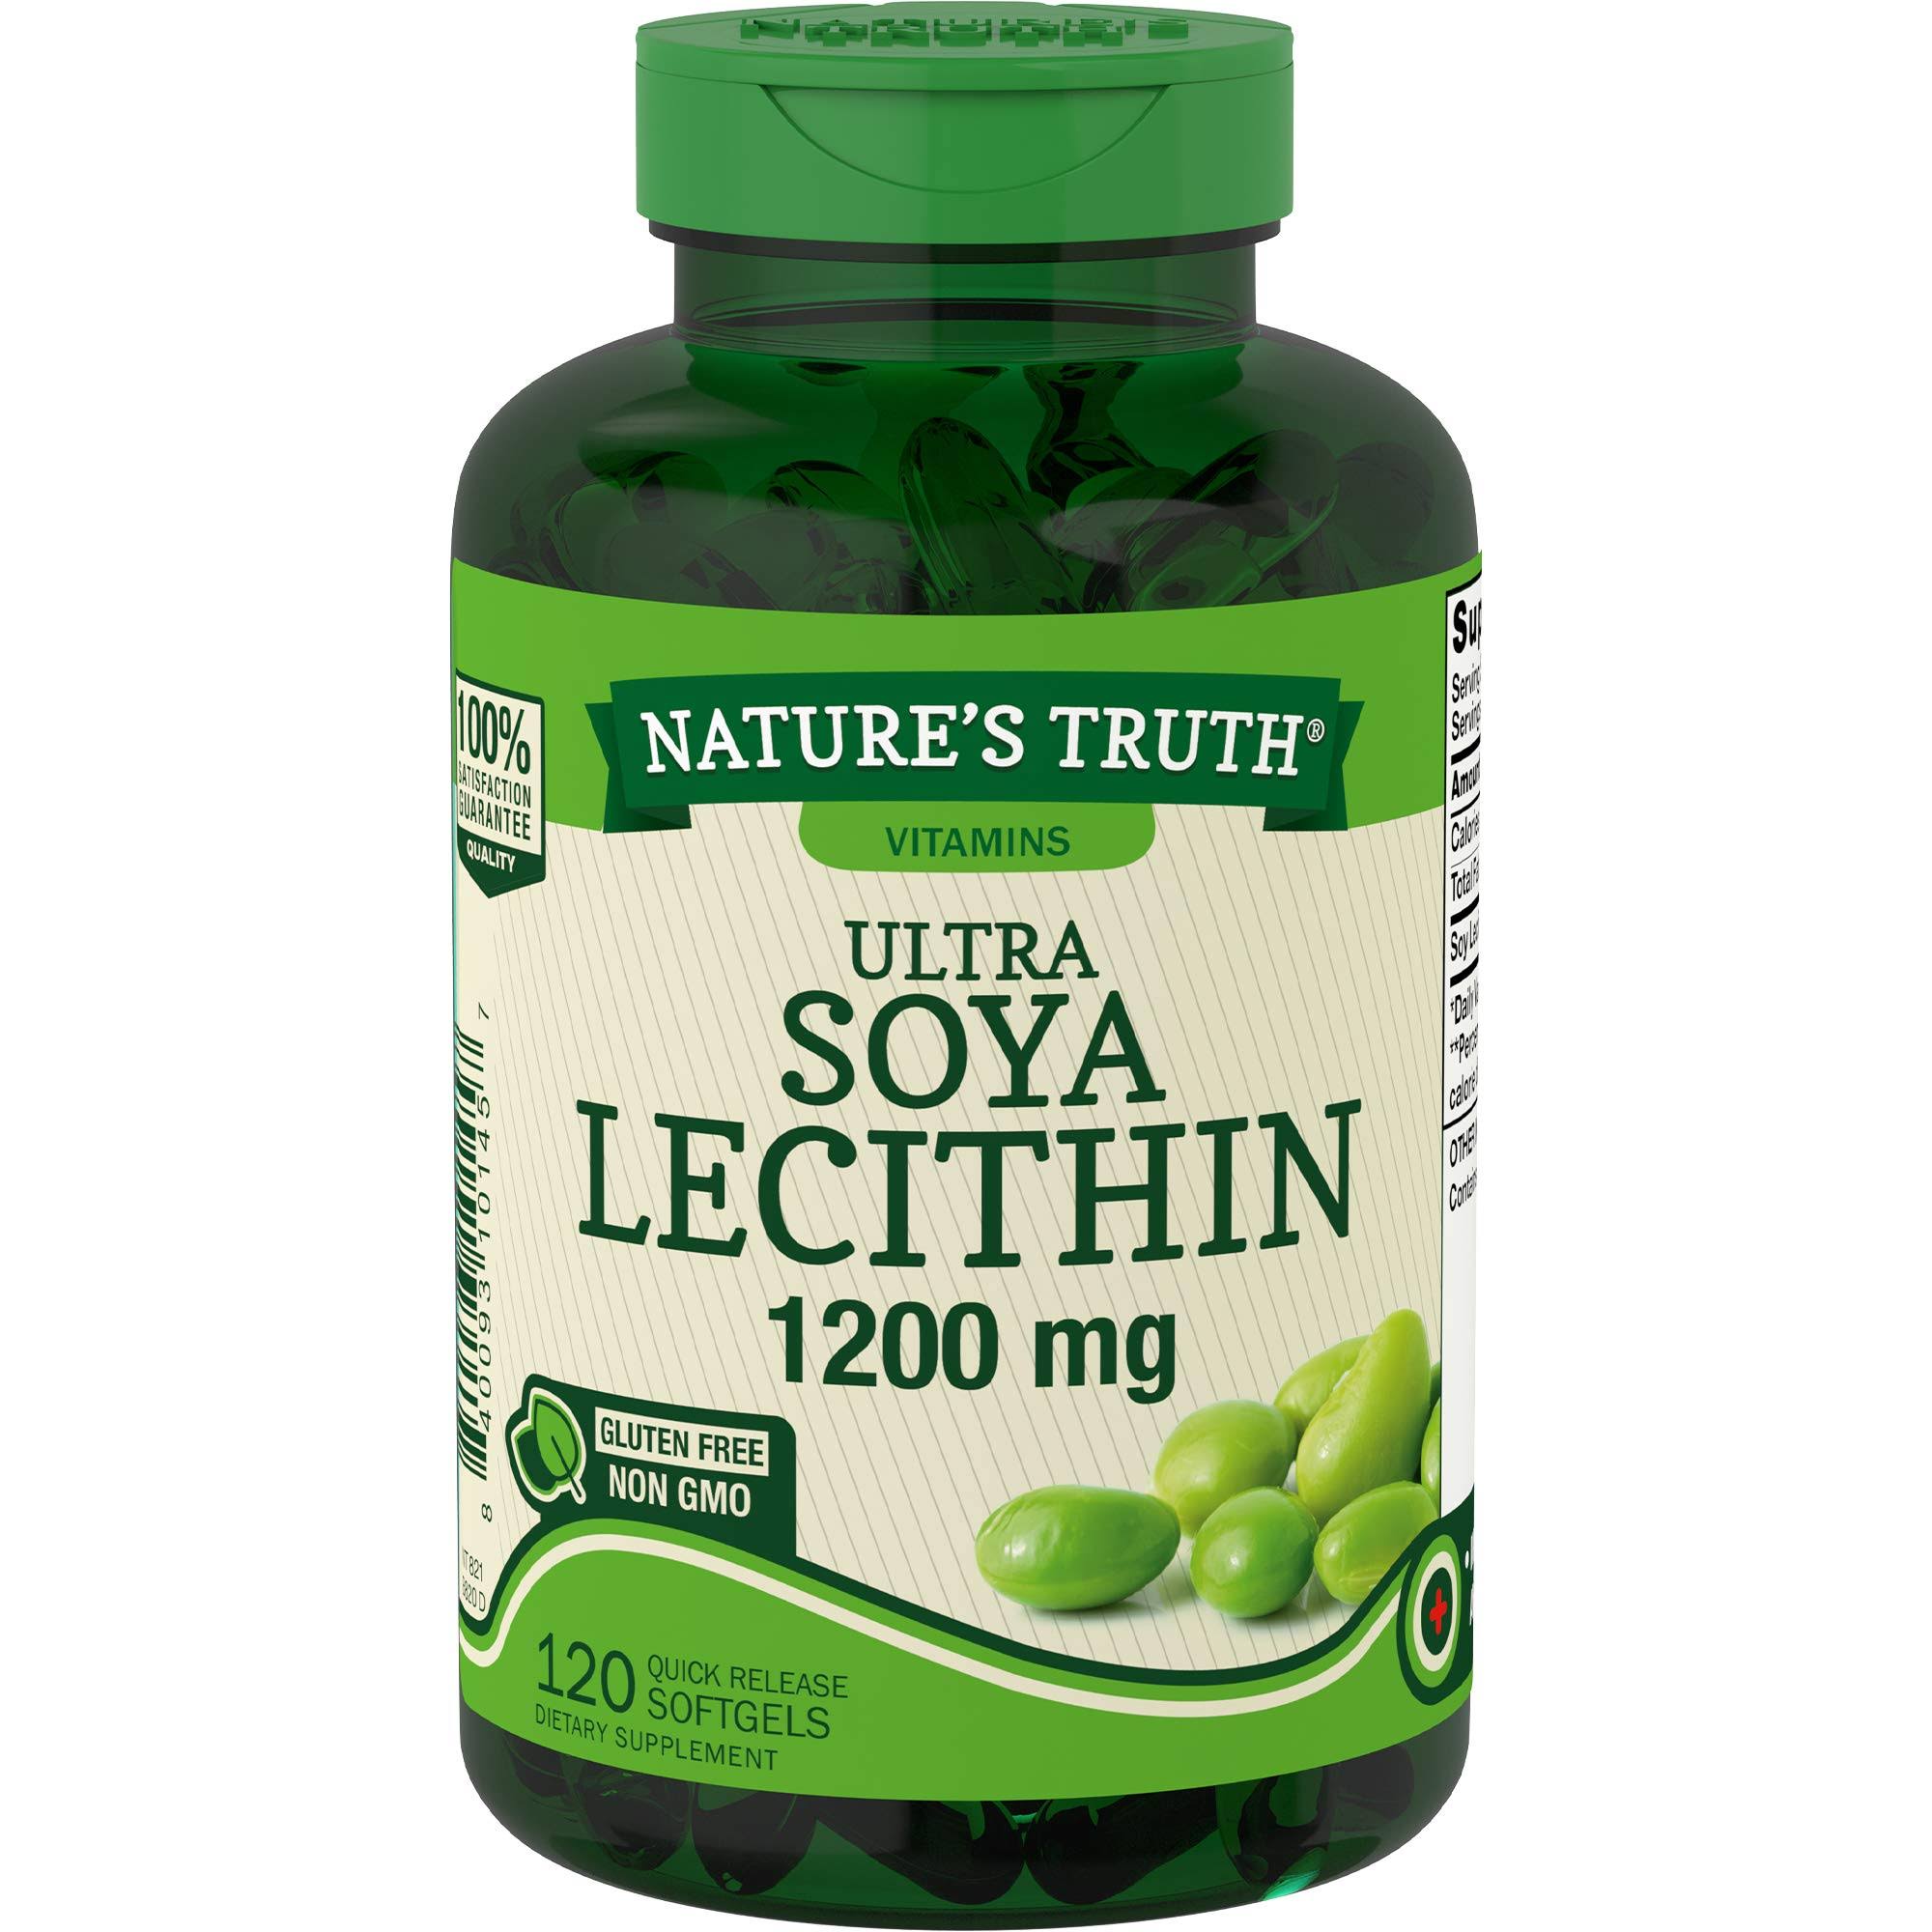 Natures Truth Ultra Soya Lecithin Quick Release Softgels Vitamins - 120ct